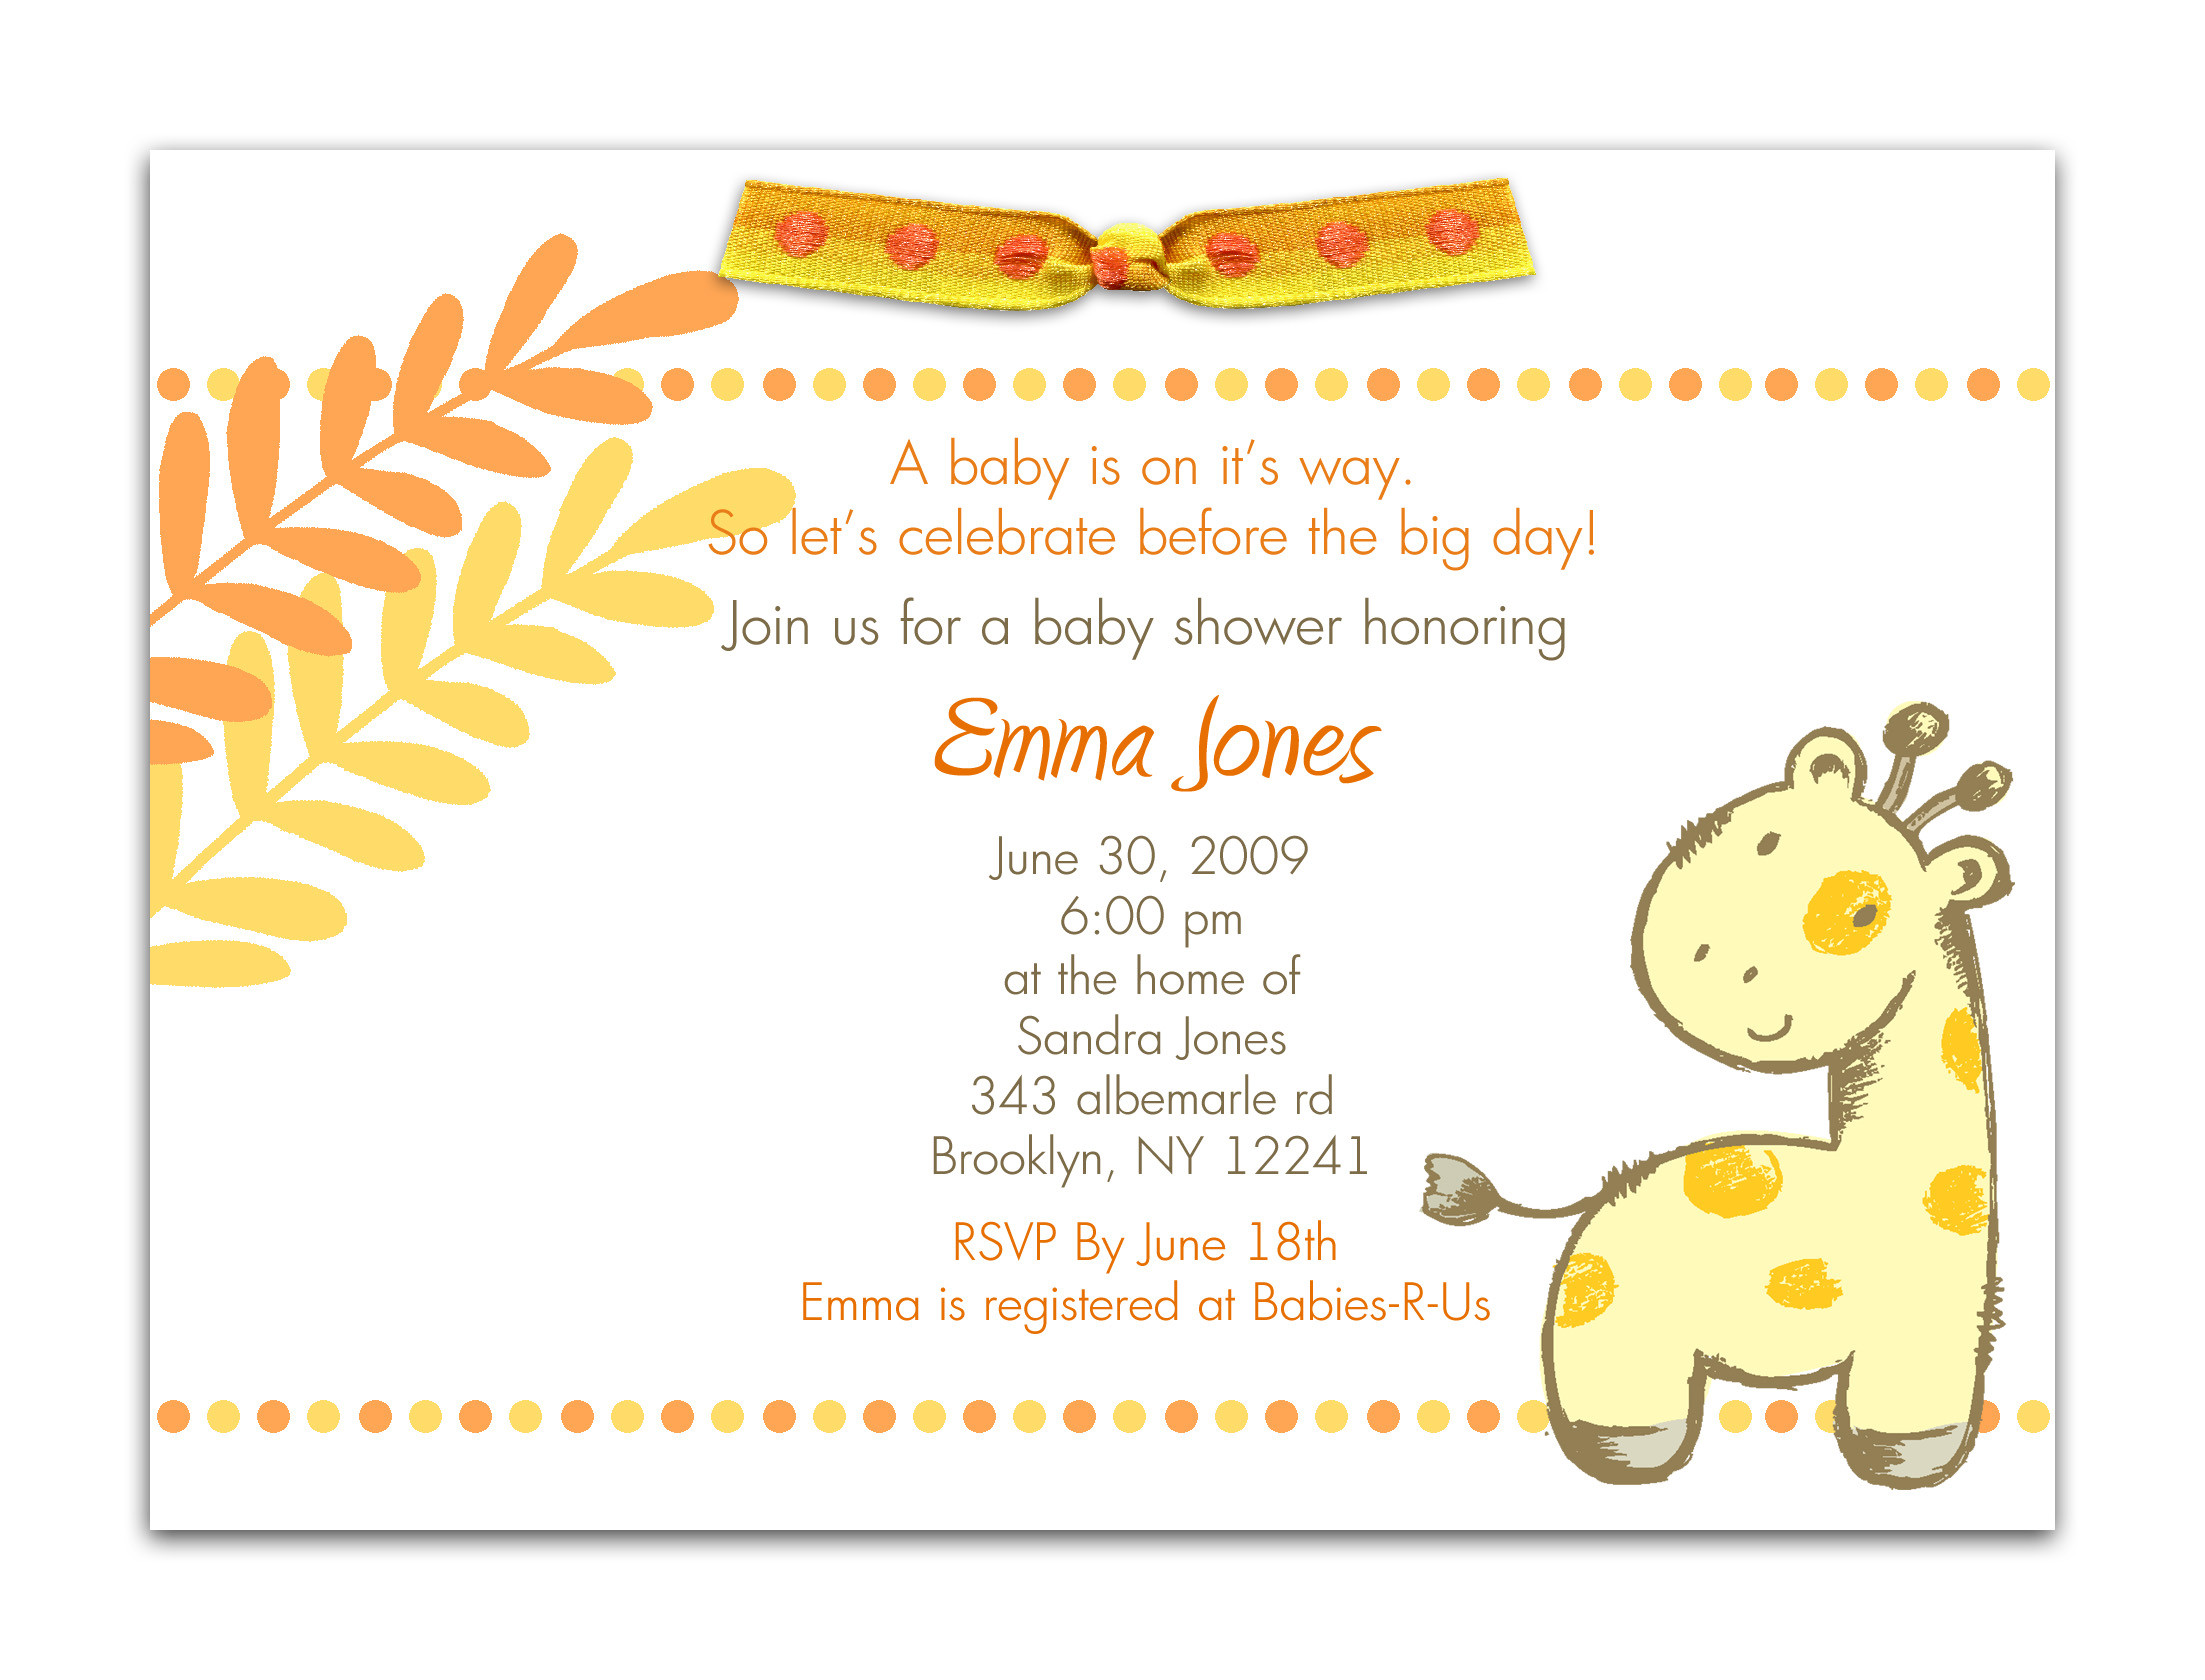 Full Size of Baby Shower:delightful Baby Shower Invitation Wording Picture Designs Para Baby Shower Recuerdos De Baby Shower Baby Shower Verses Baby Shower Wishing Well Baby Favors Cheap Baby Shower Favors